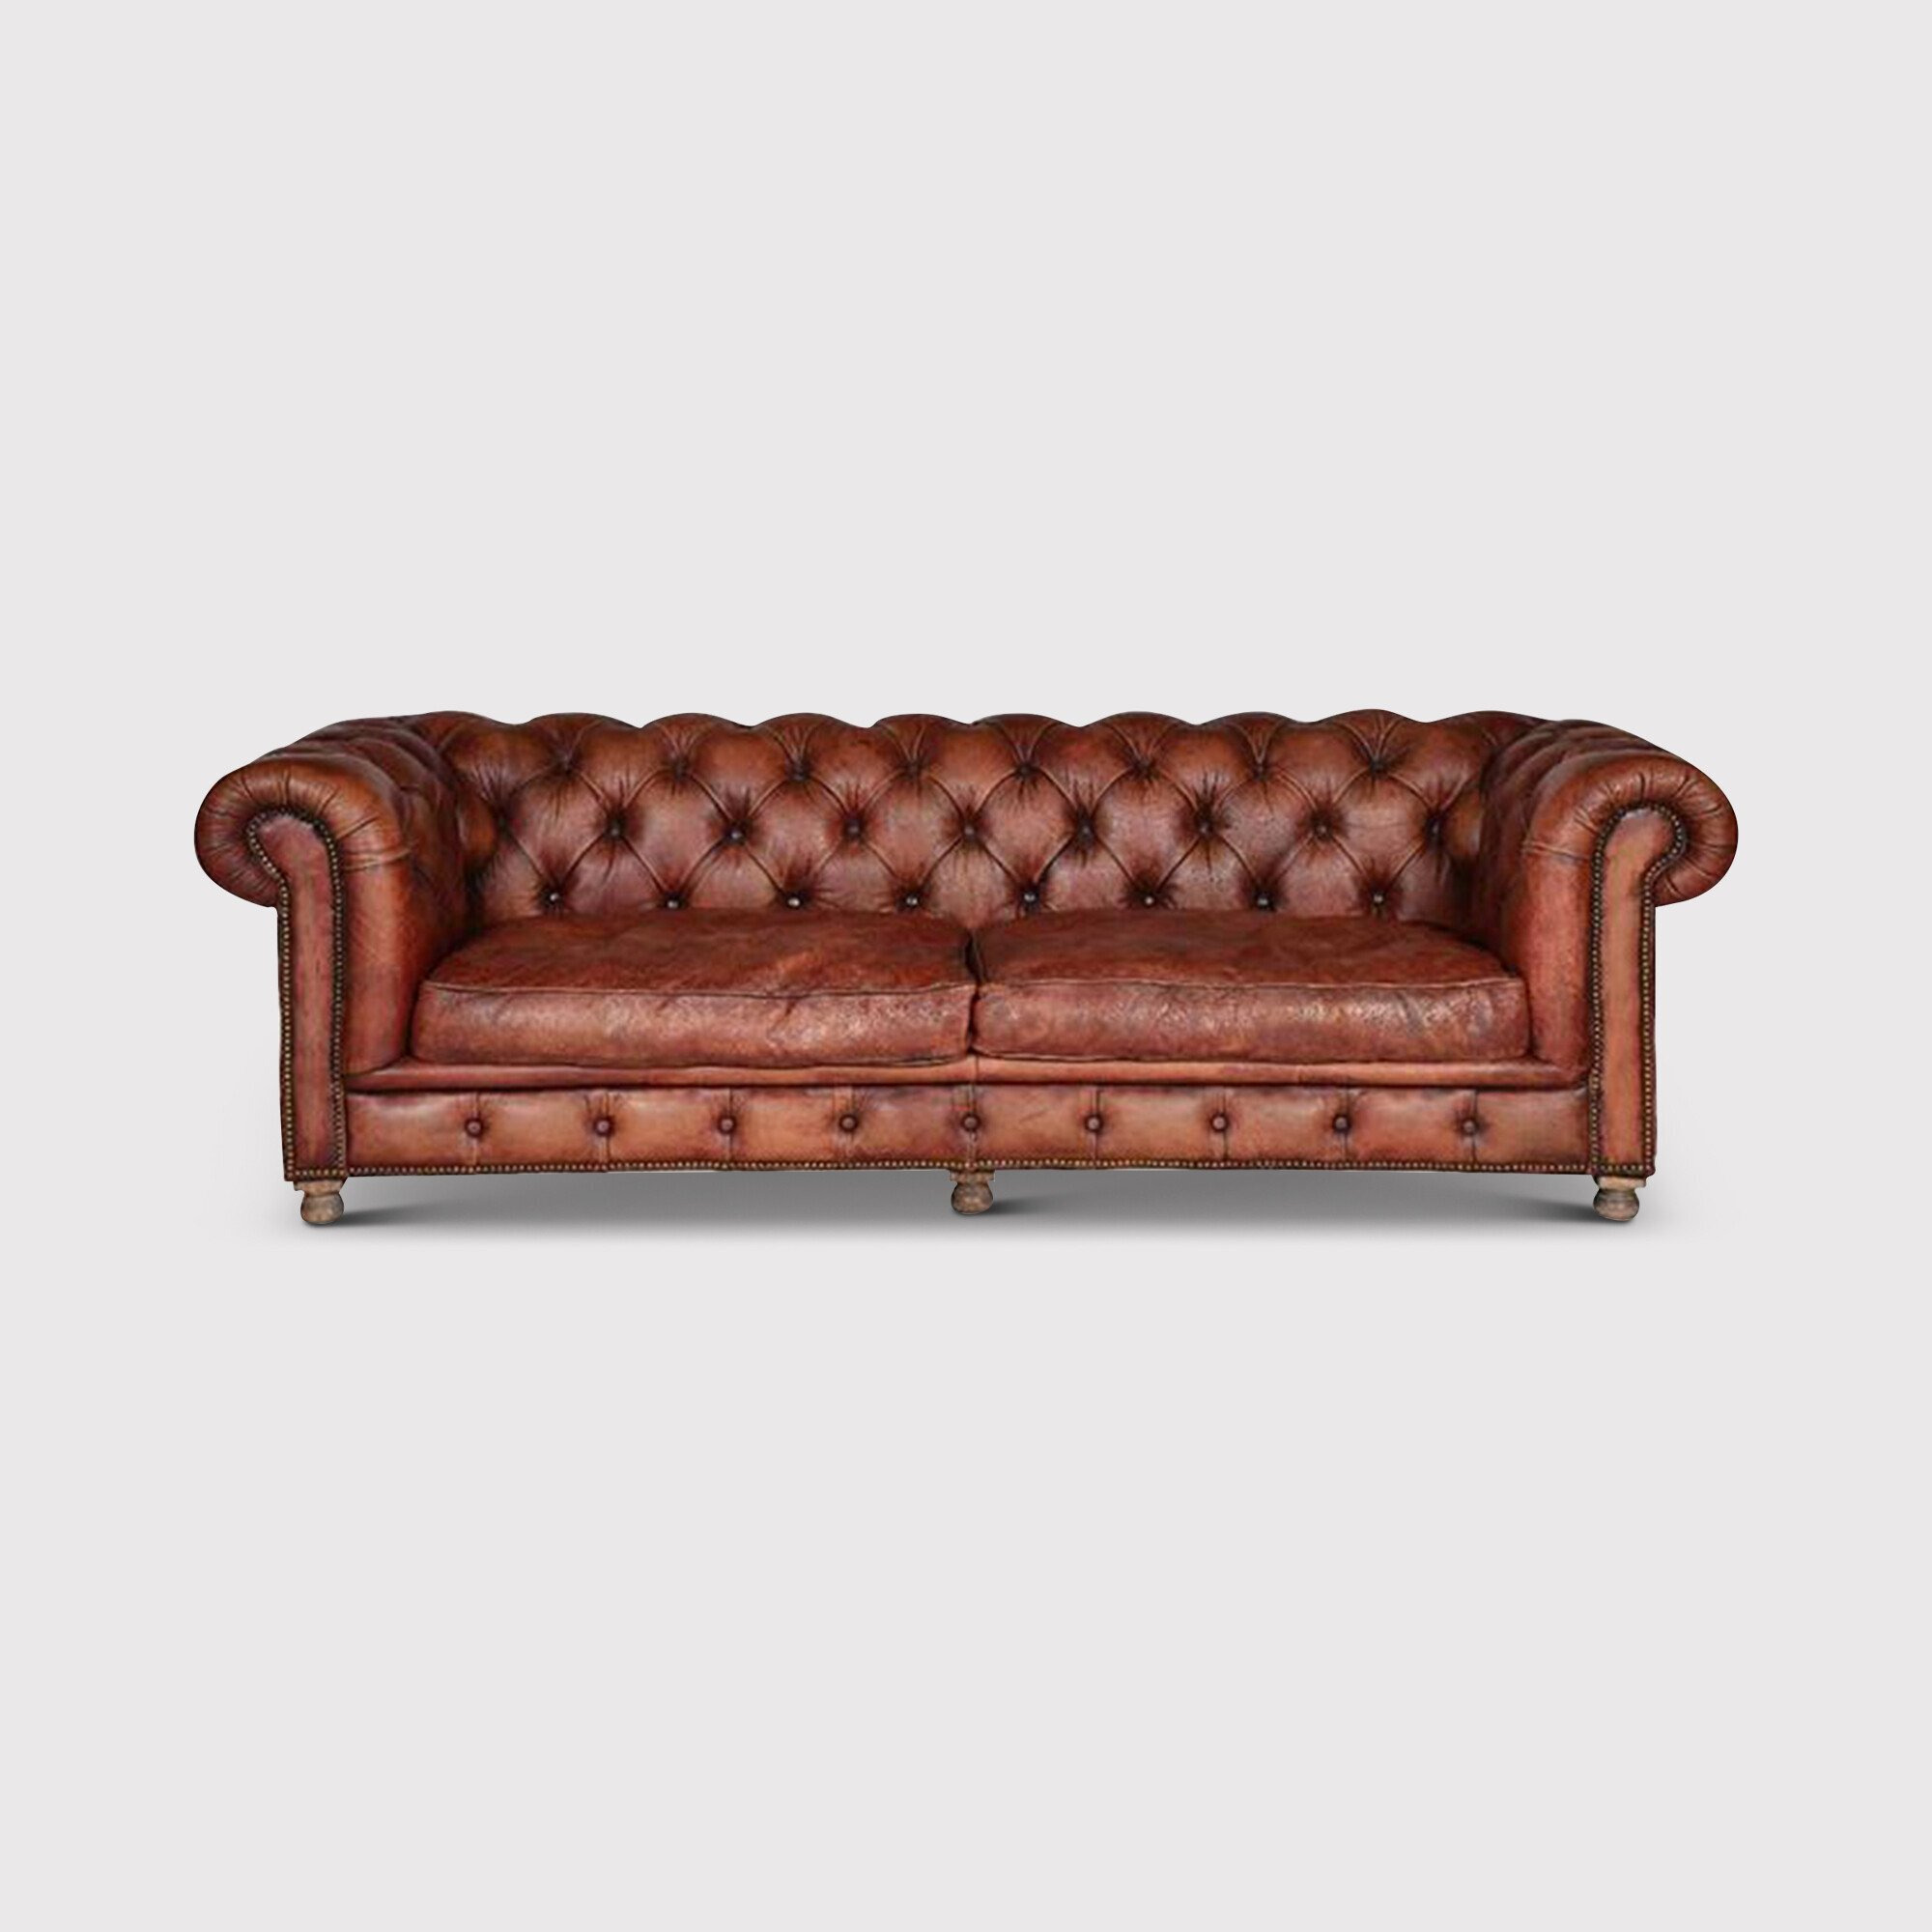 Timothy Oulton Westminster Feather Chesterfield Sofa 3 Seater, Red Leather - Barker & Stonehouse - image 1